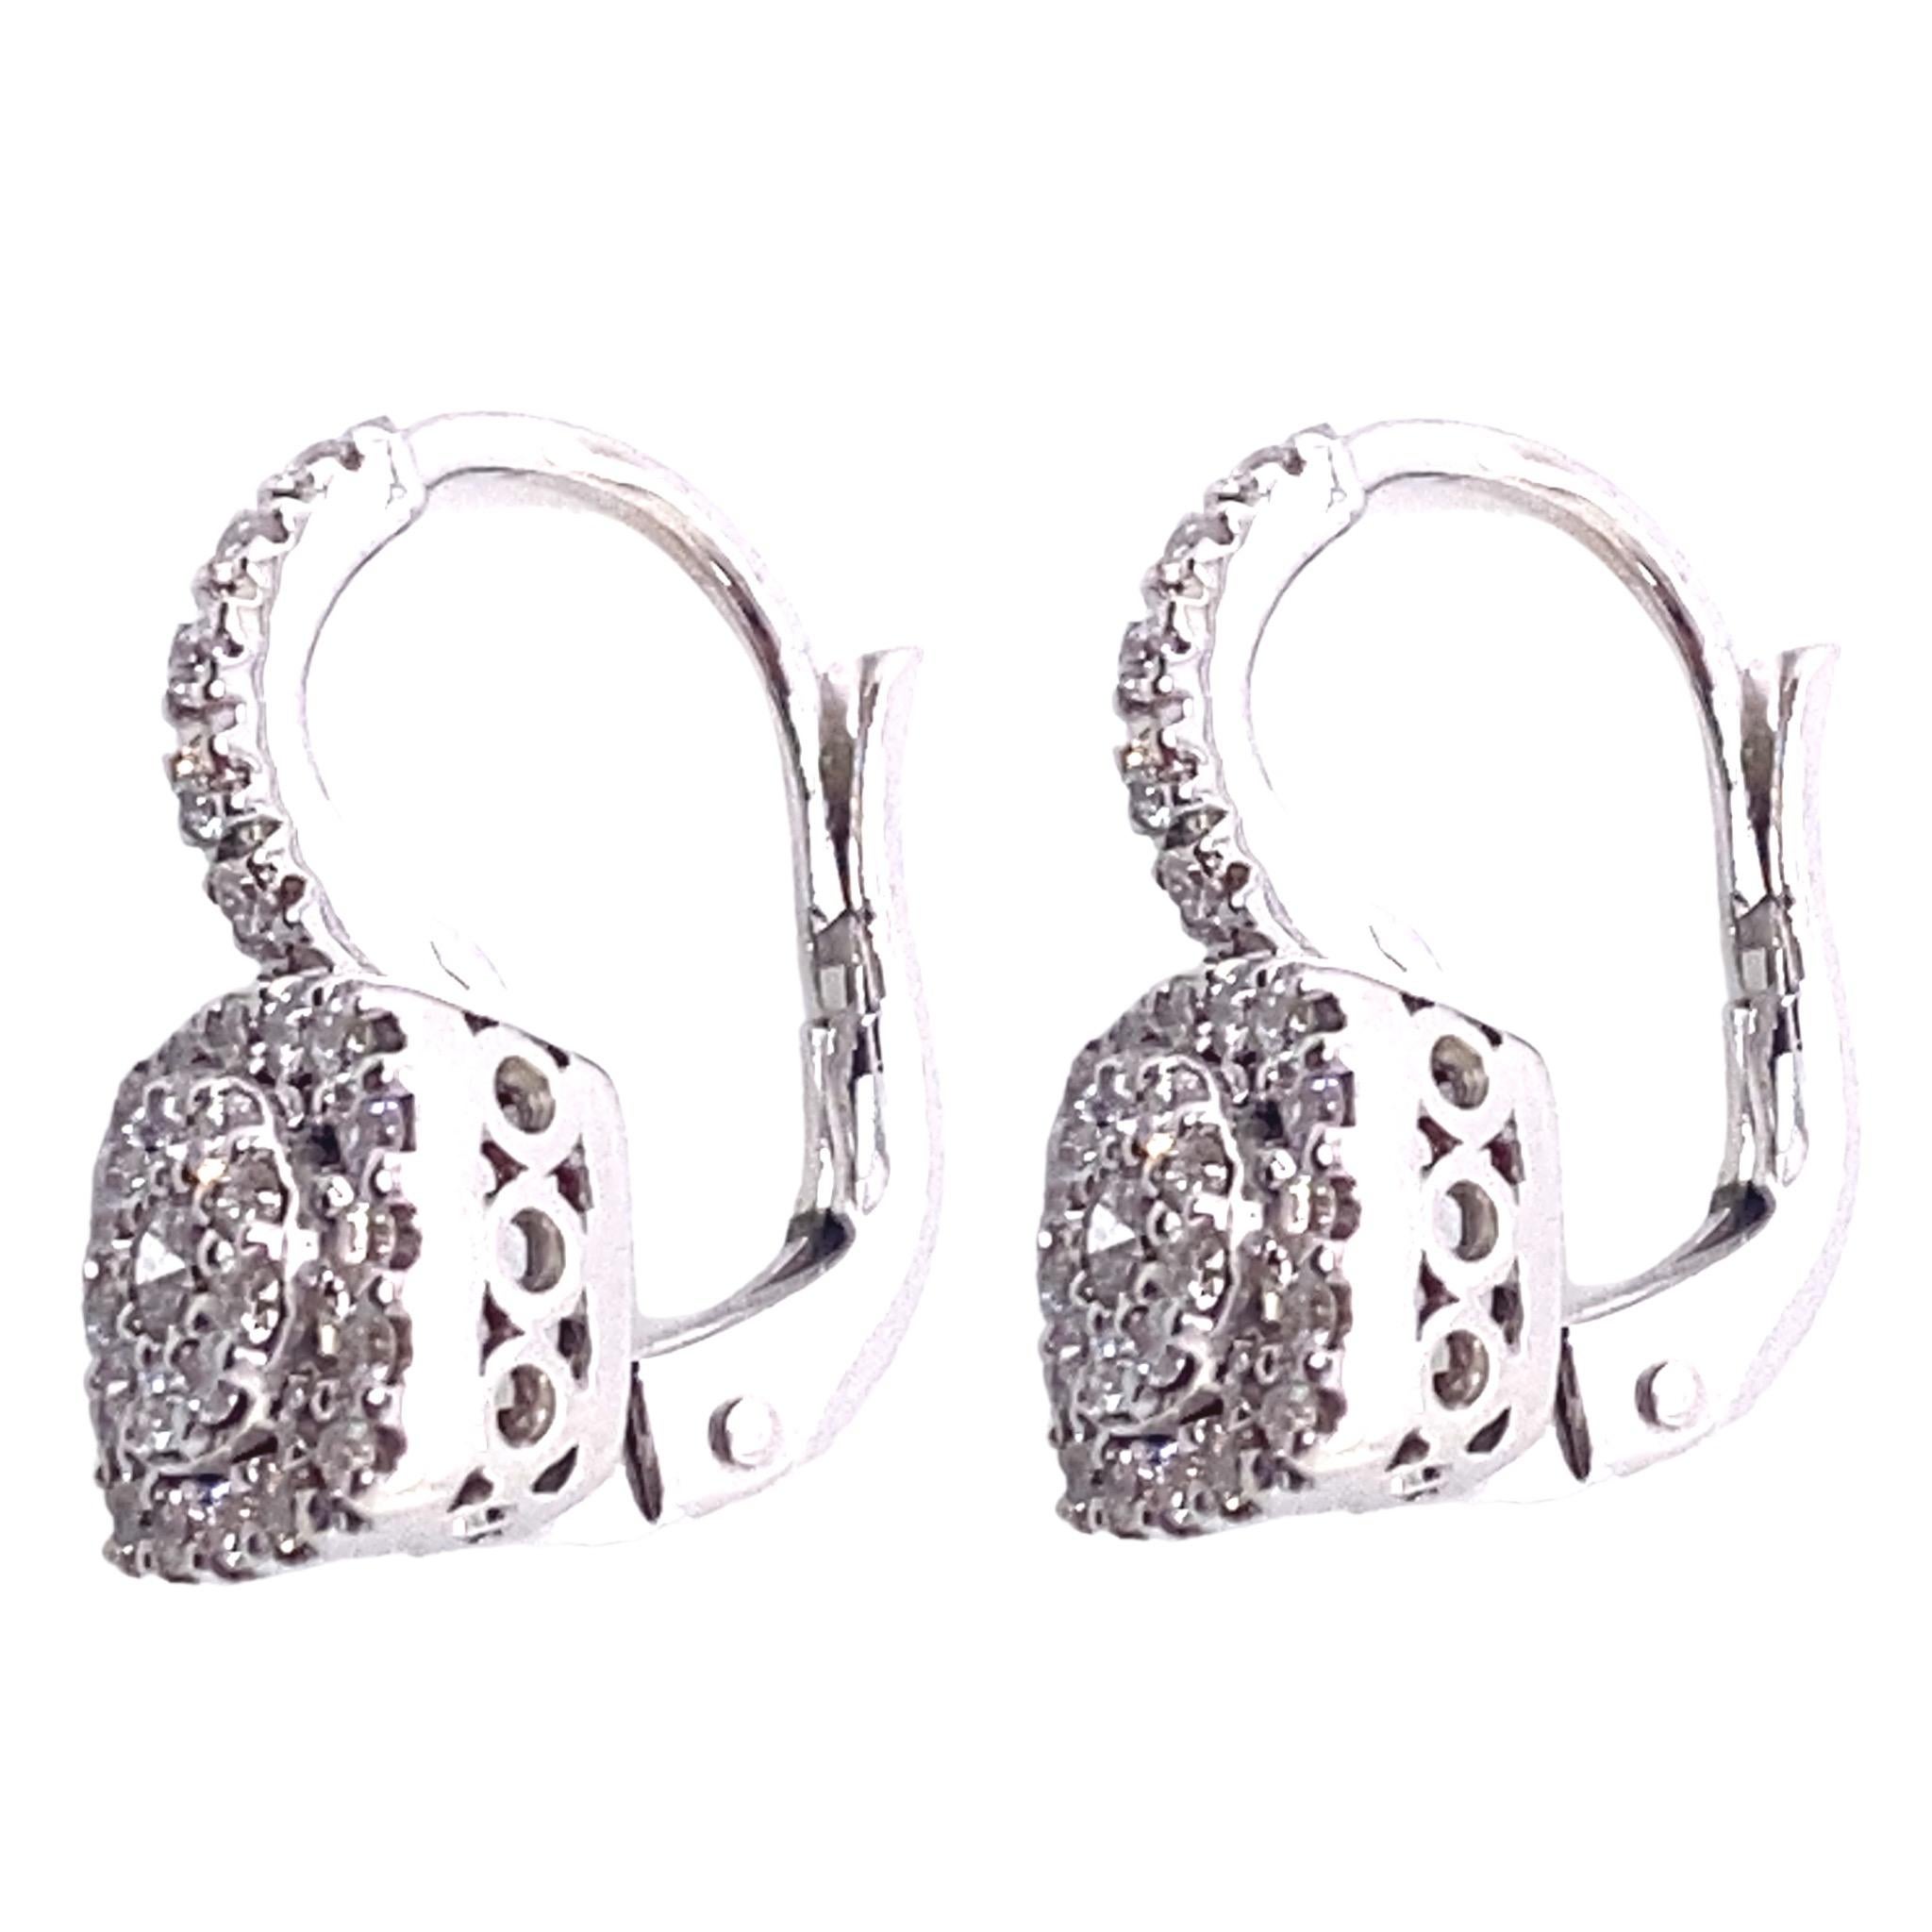 Introducing a timeless masterpiece that exudes elegance and sophistication - a pair of stunning white gold and diamond French-clip drop earrings. Impeccably crafted by skilled artisans, these earrings are a true testament to the artistry and